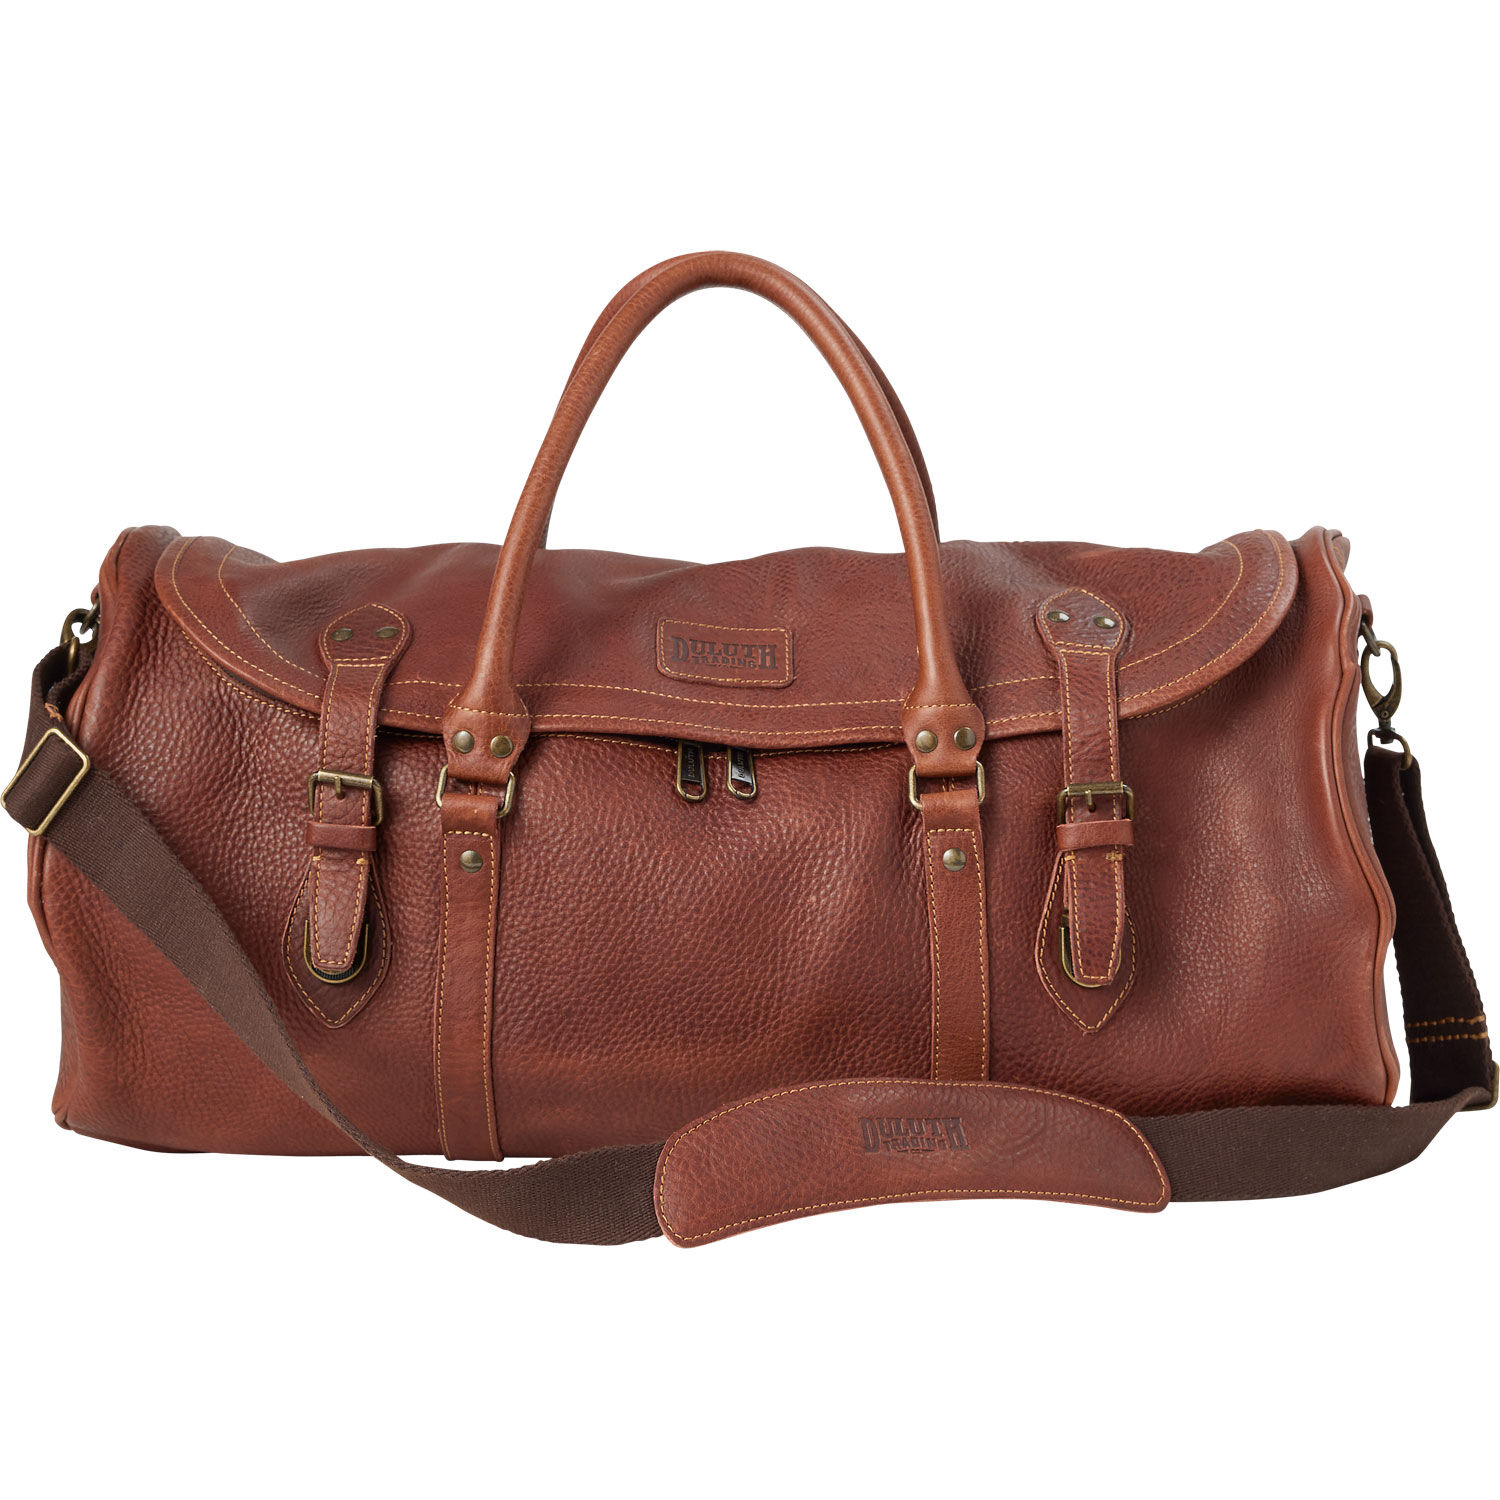 Grab This High-Quality Leather Travel Bag at 15% Off